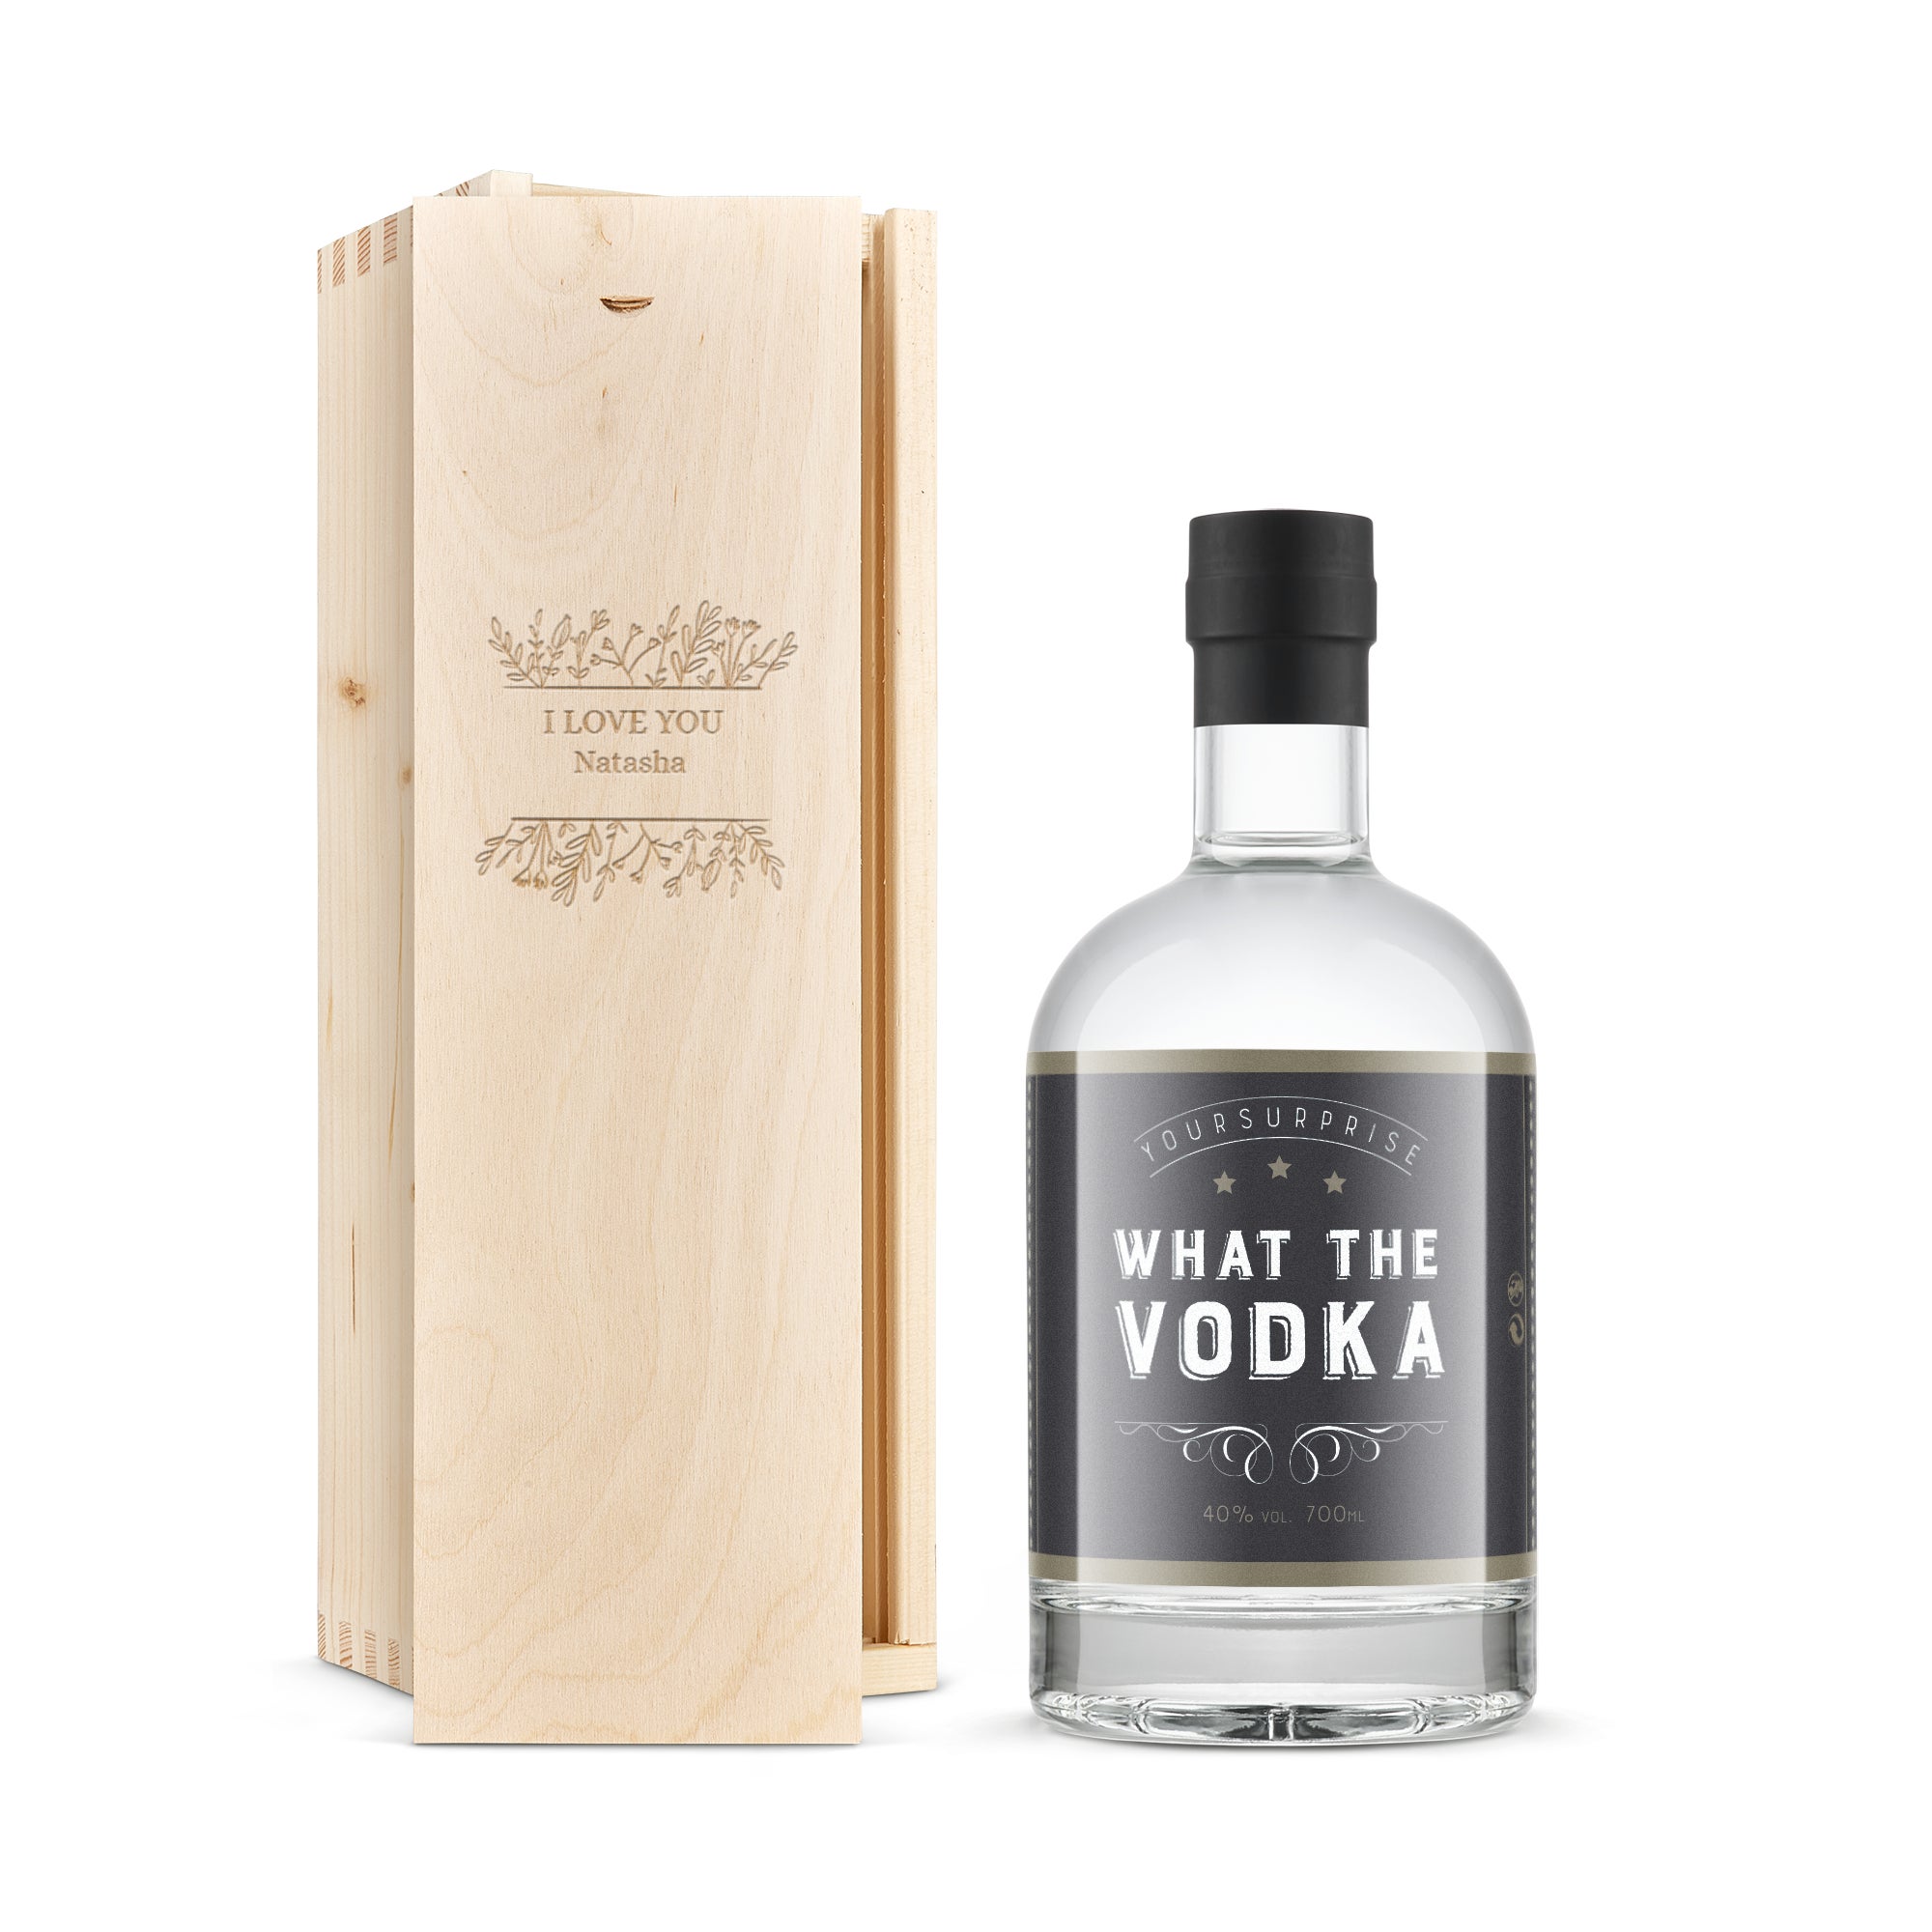 Personalised vodka gift - YourSurprise - Engraved wooden case